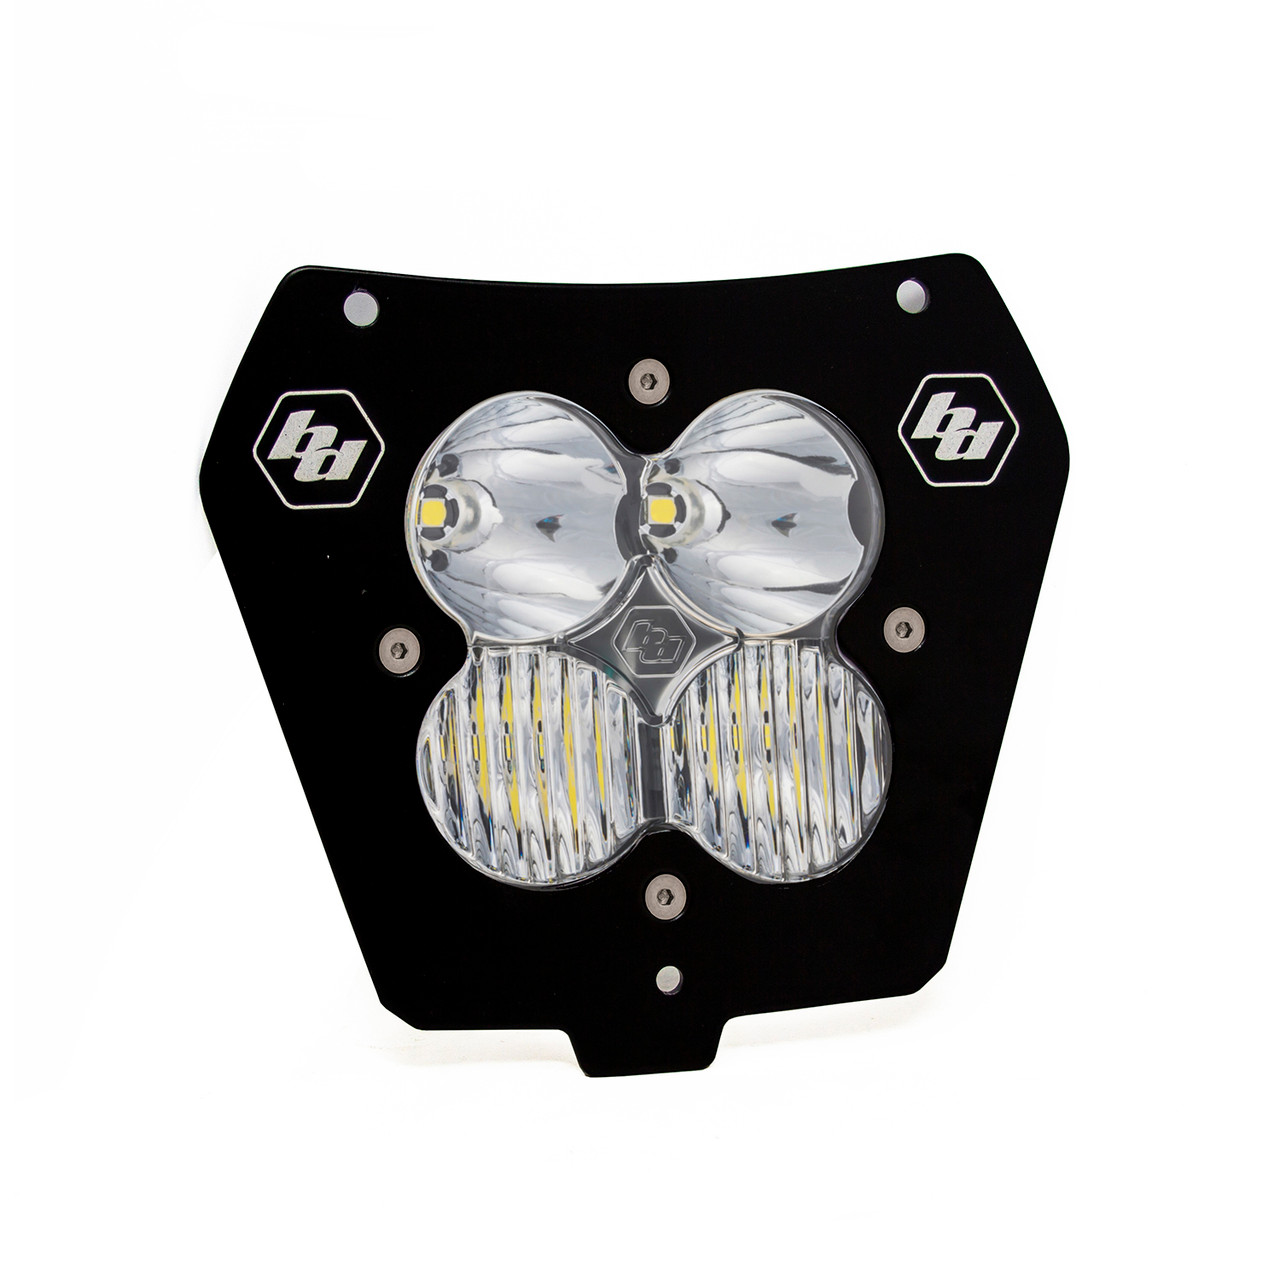 Additional LED headlights for motorcycle KTM EXC 125 (2008 - 2012)